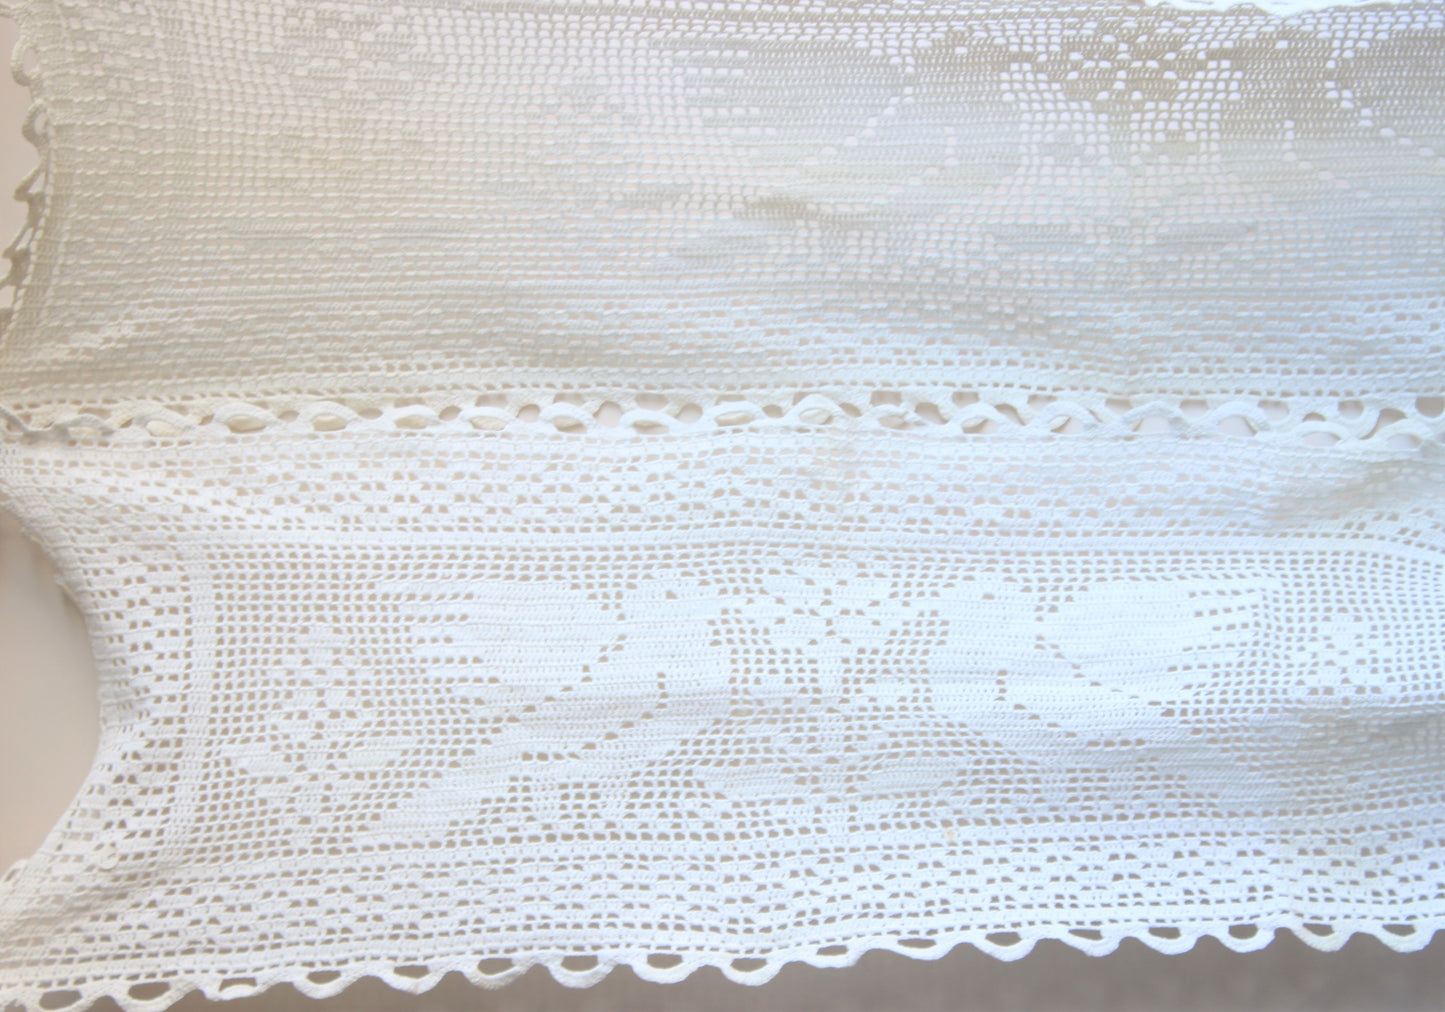 Vintage 1960s Crochet Table runners or Sofa Covers